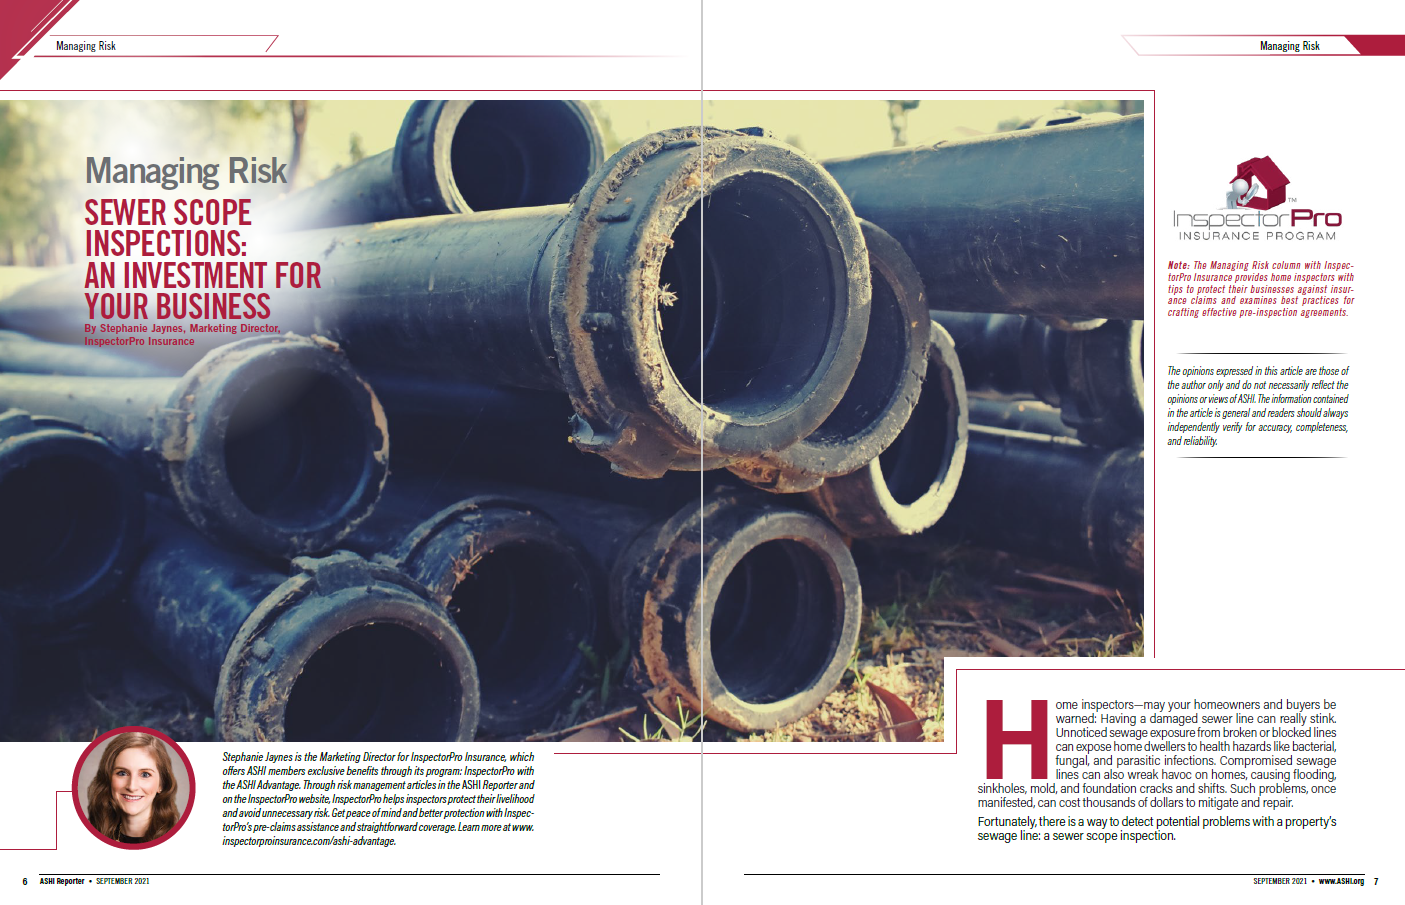 Picture of sewer scope inspection article in a magazine